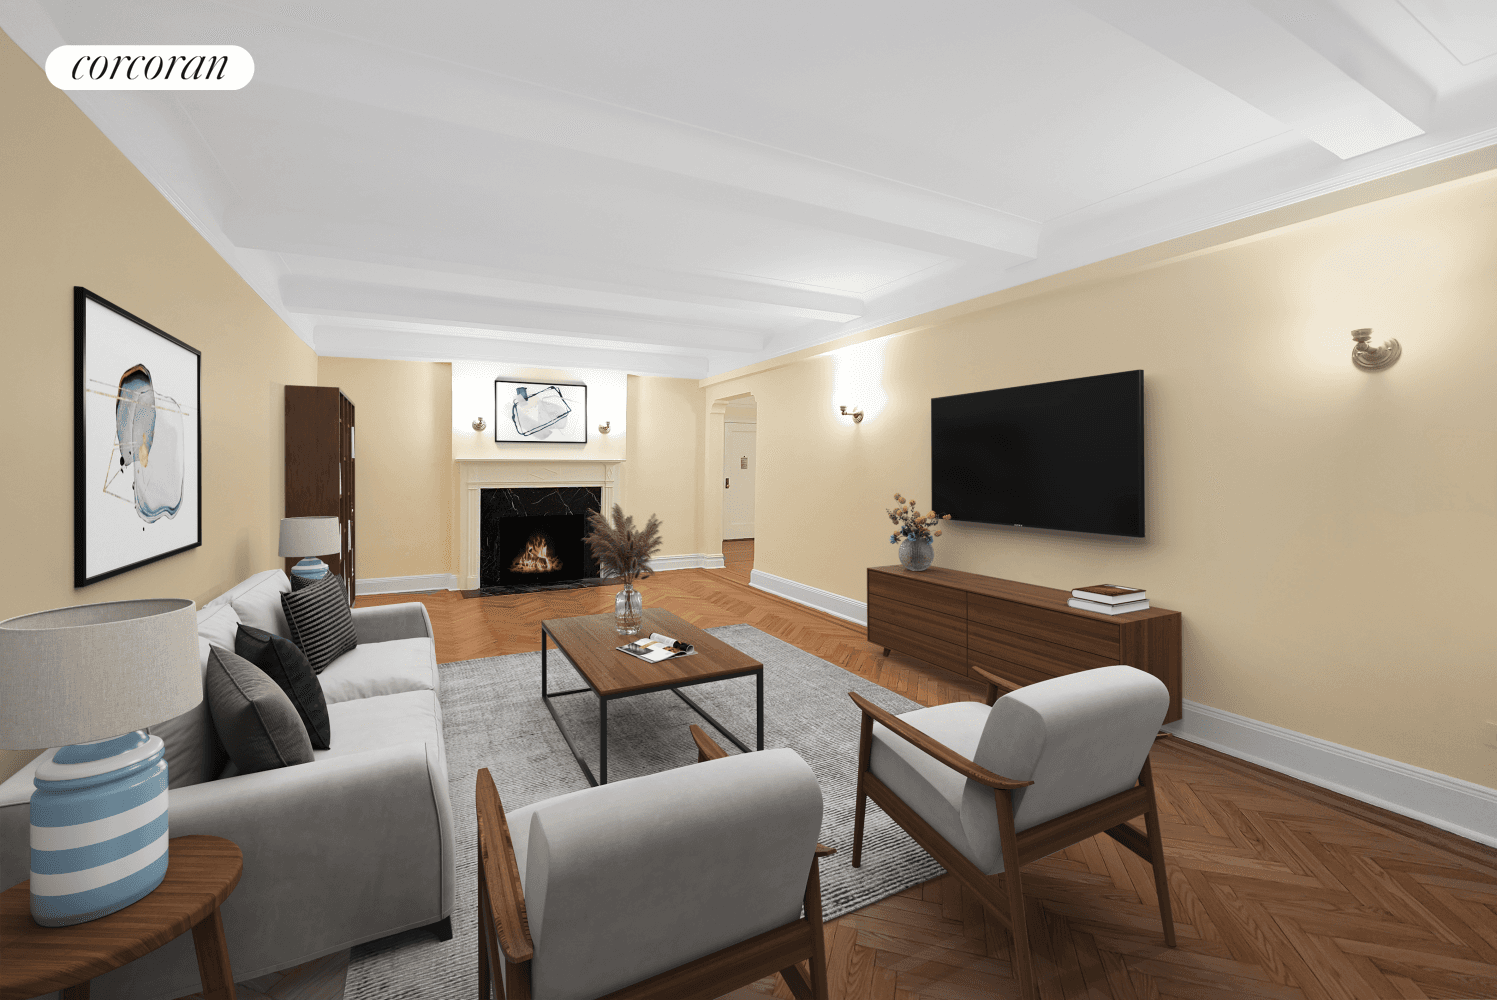 Grand three bedroom prewar apartment with wood burning fireplace, herringbone floors, separate dine in kitchen, large formal dinning room, King Size bedrooms, and much more.